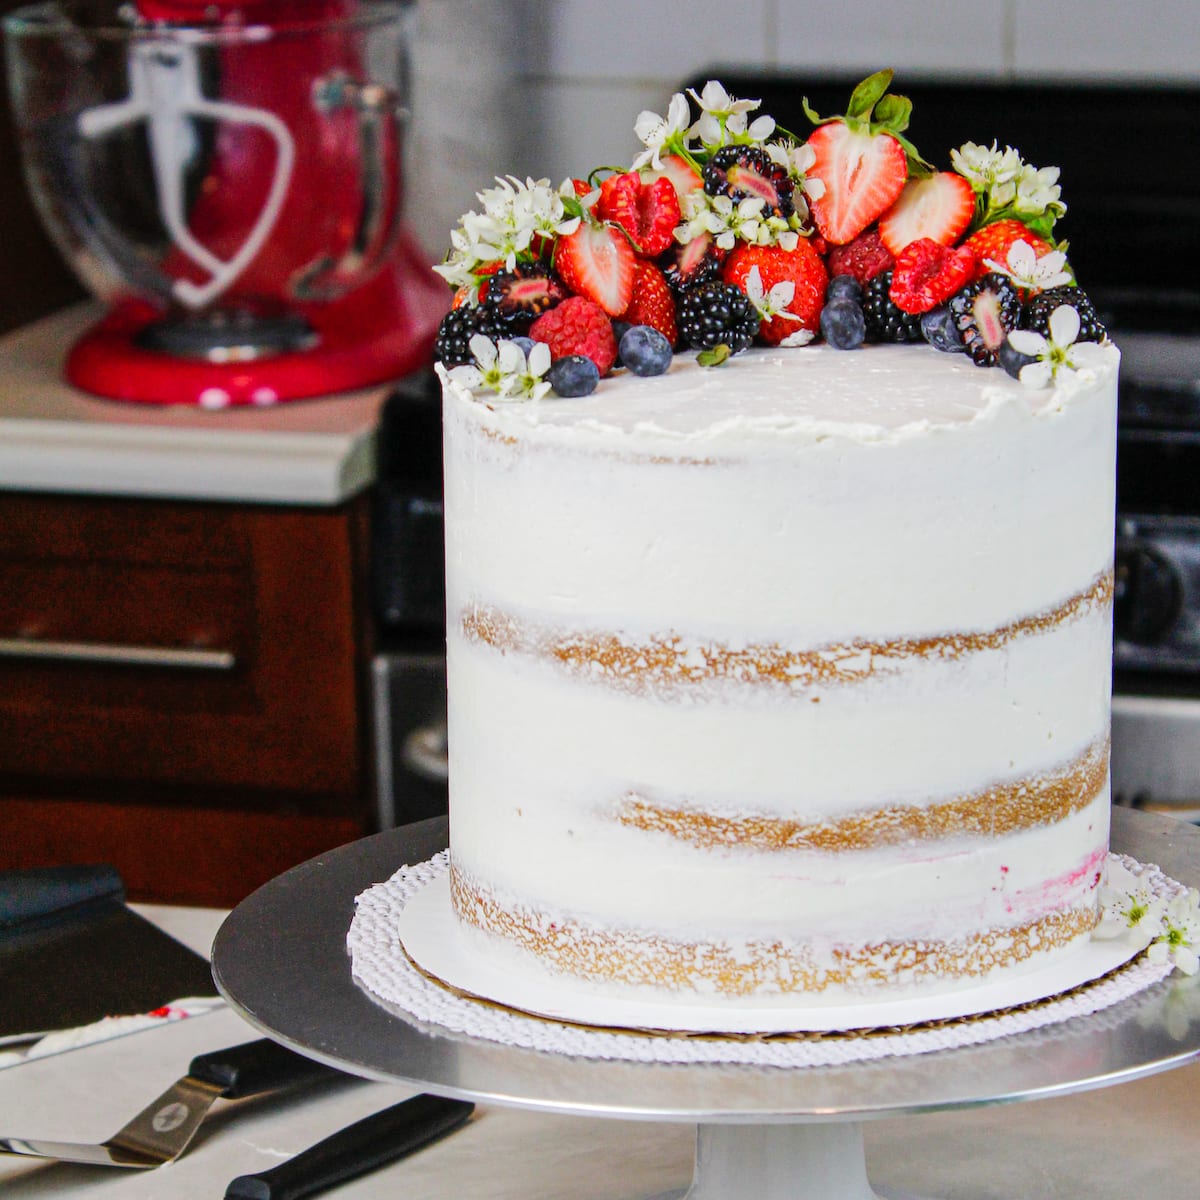 staged-finished-cake-right-side-1.jpg